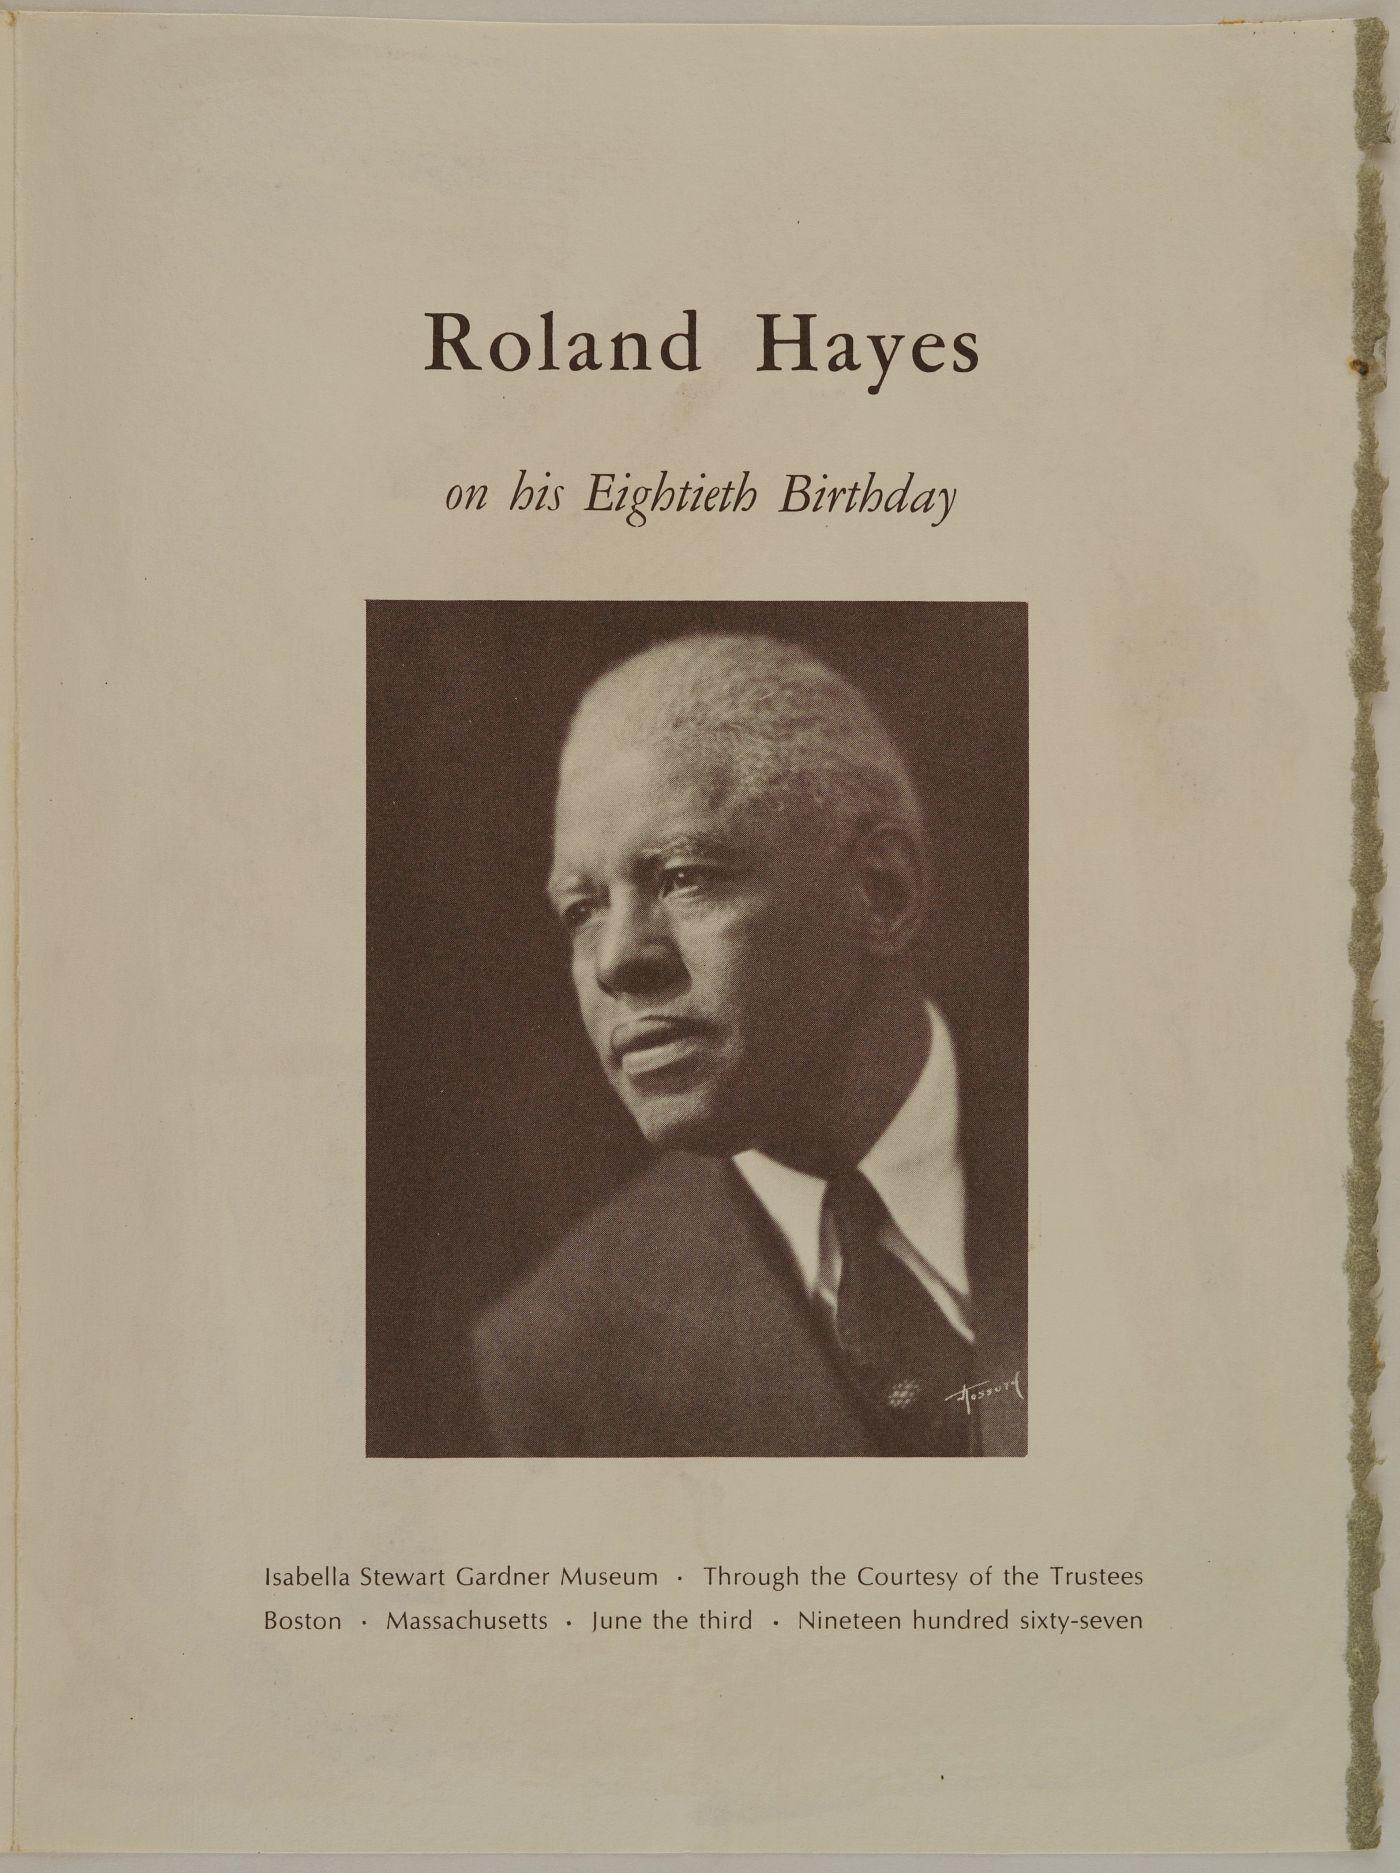 Folded program for an event at the Gardner Museum. The cover has a large studio portrait of Roland Hayes, with short wavy gray hair, wearing a suit and tie. Hayes is posing in a three-quarter profile, looking left. Text surrounds the image